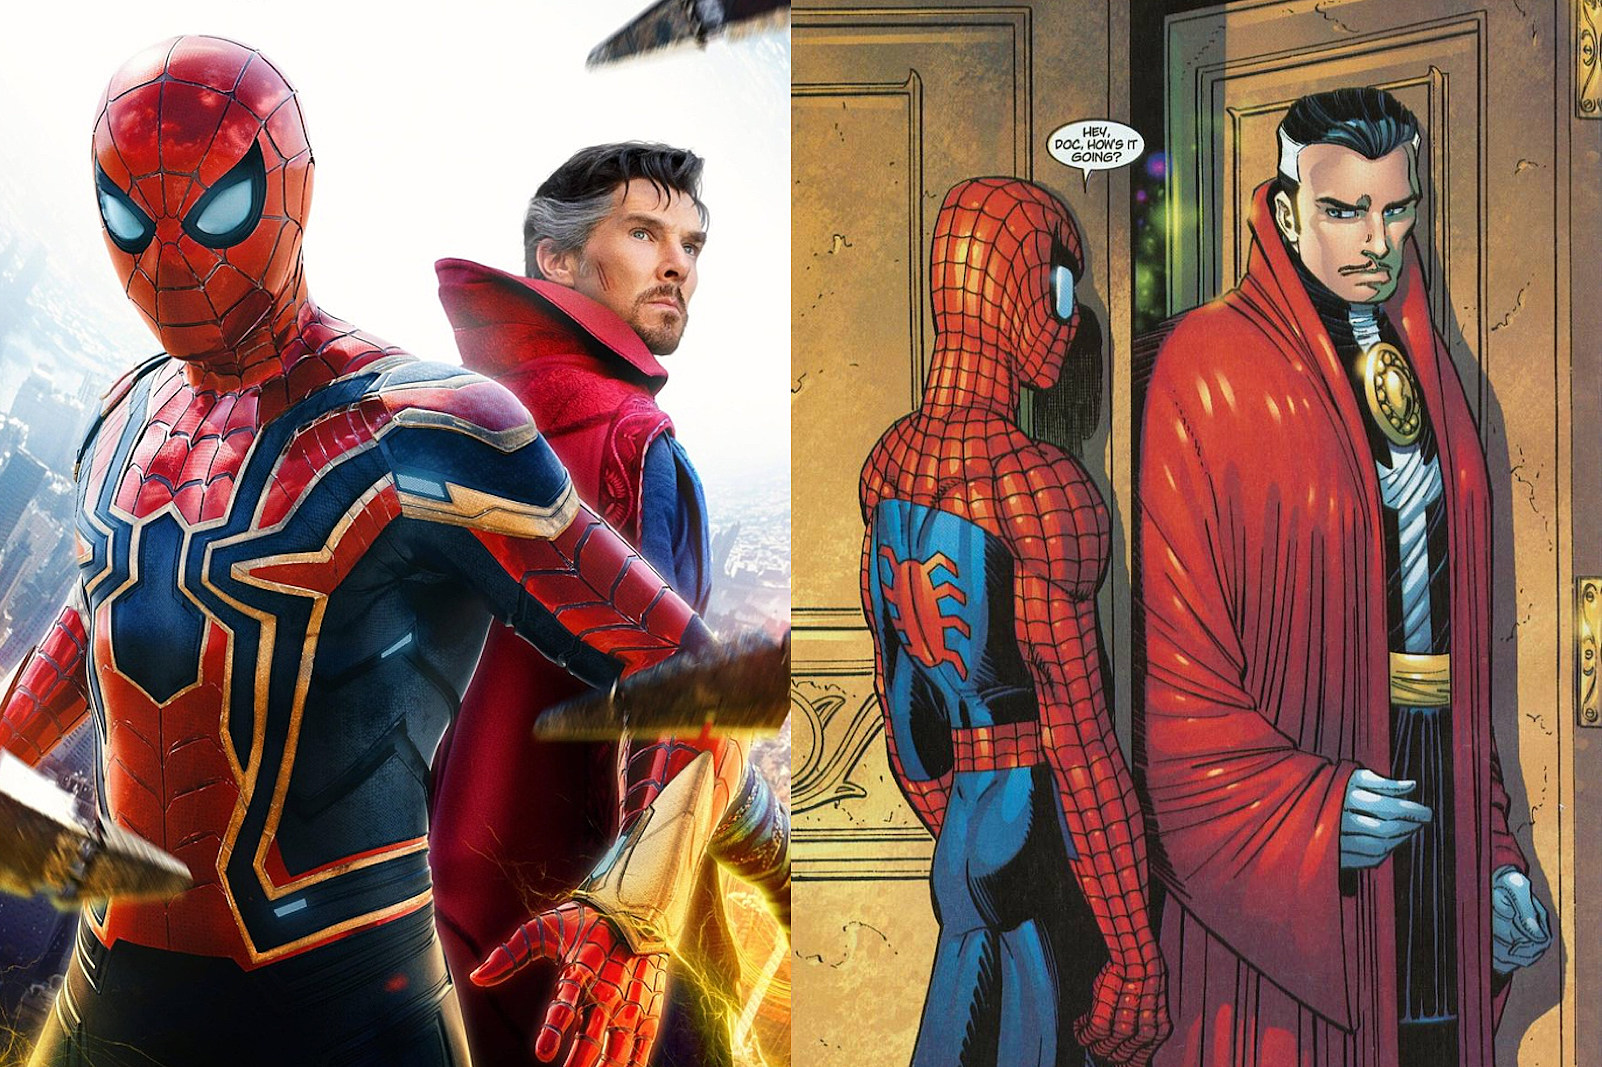 Spider-Man: No Way Home': All the Coolest Easter Eggs